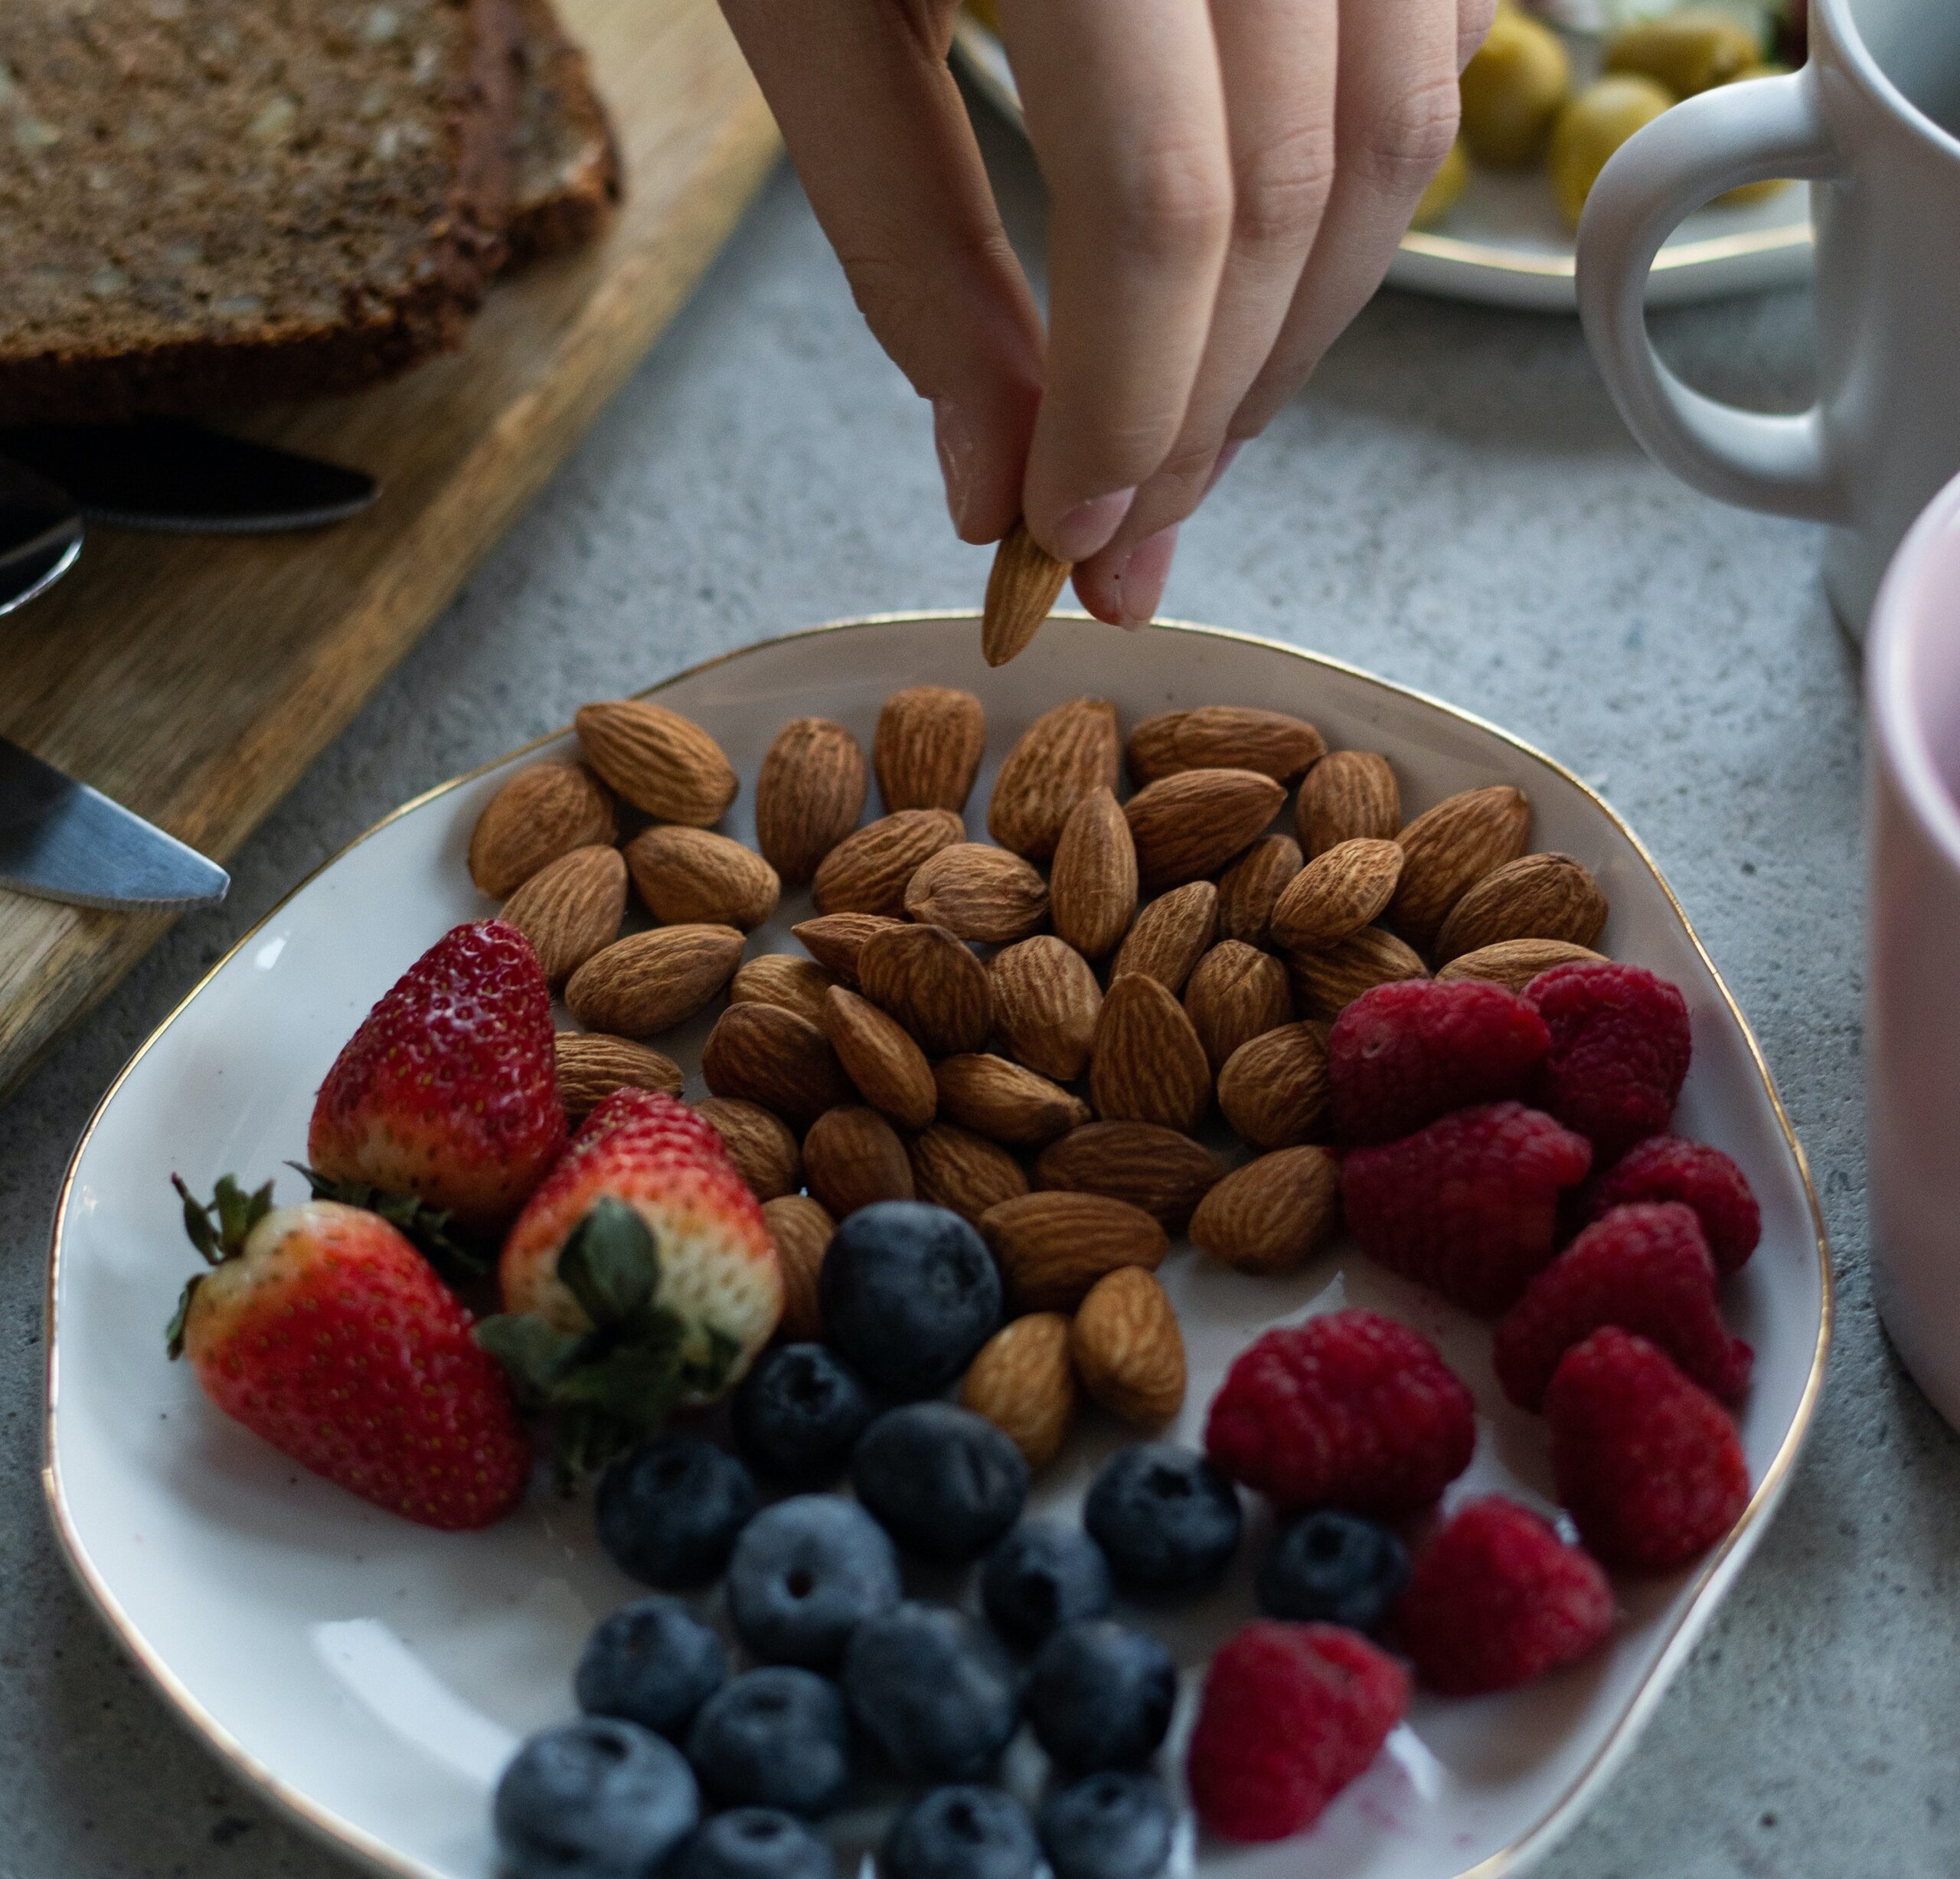 a person picking up an almond from a plate with nuts and berries